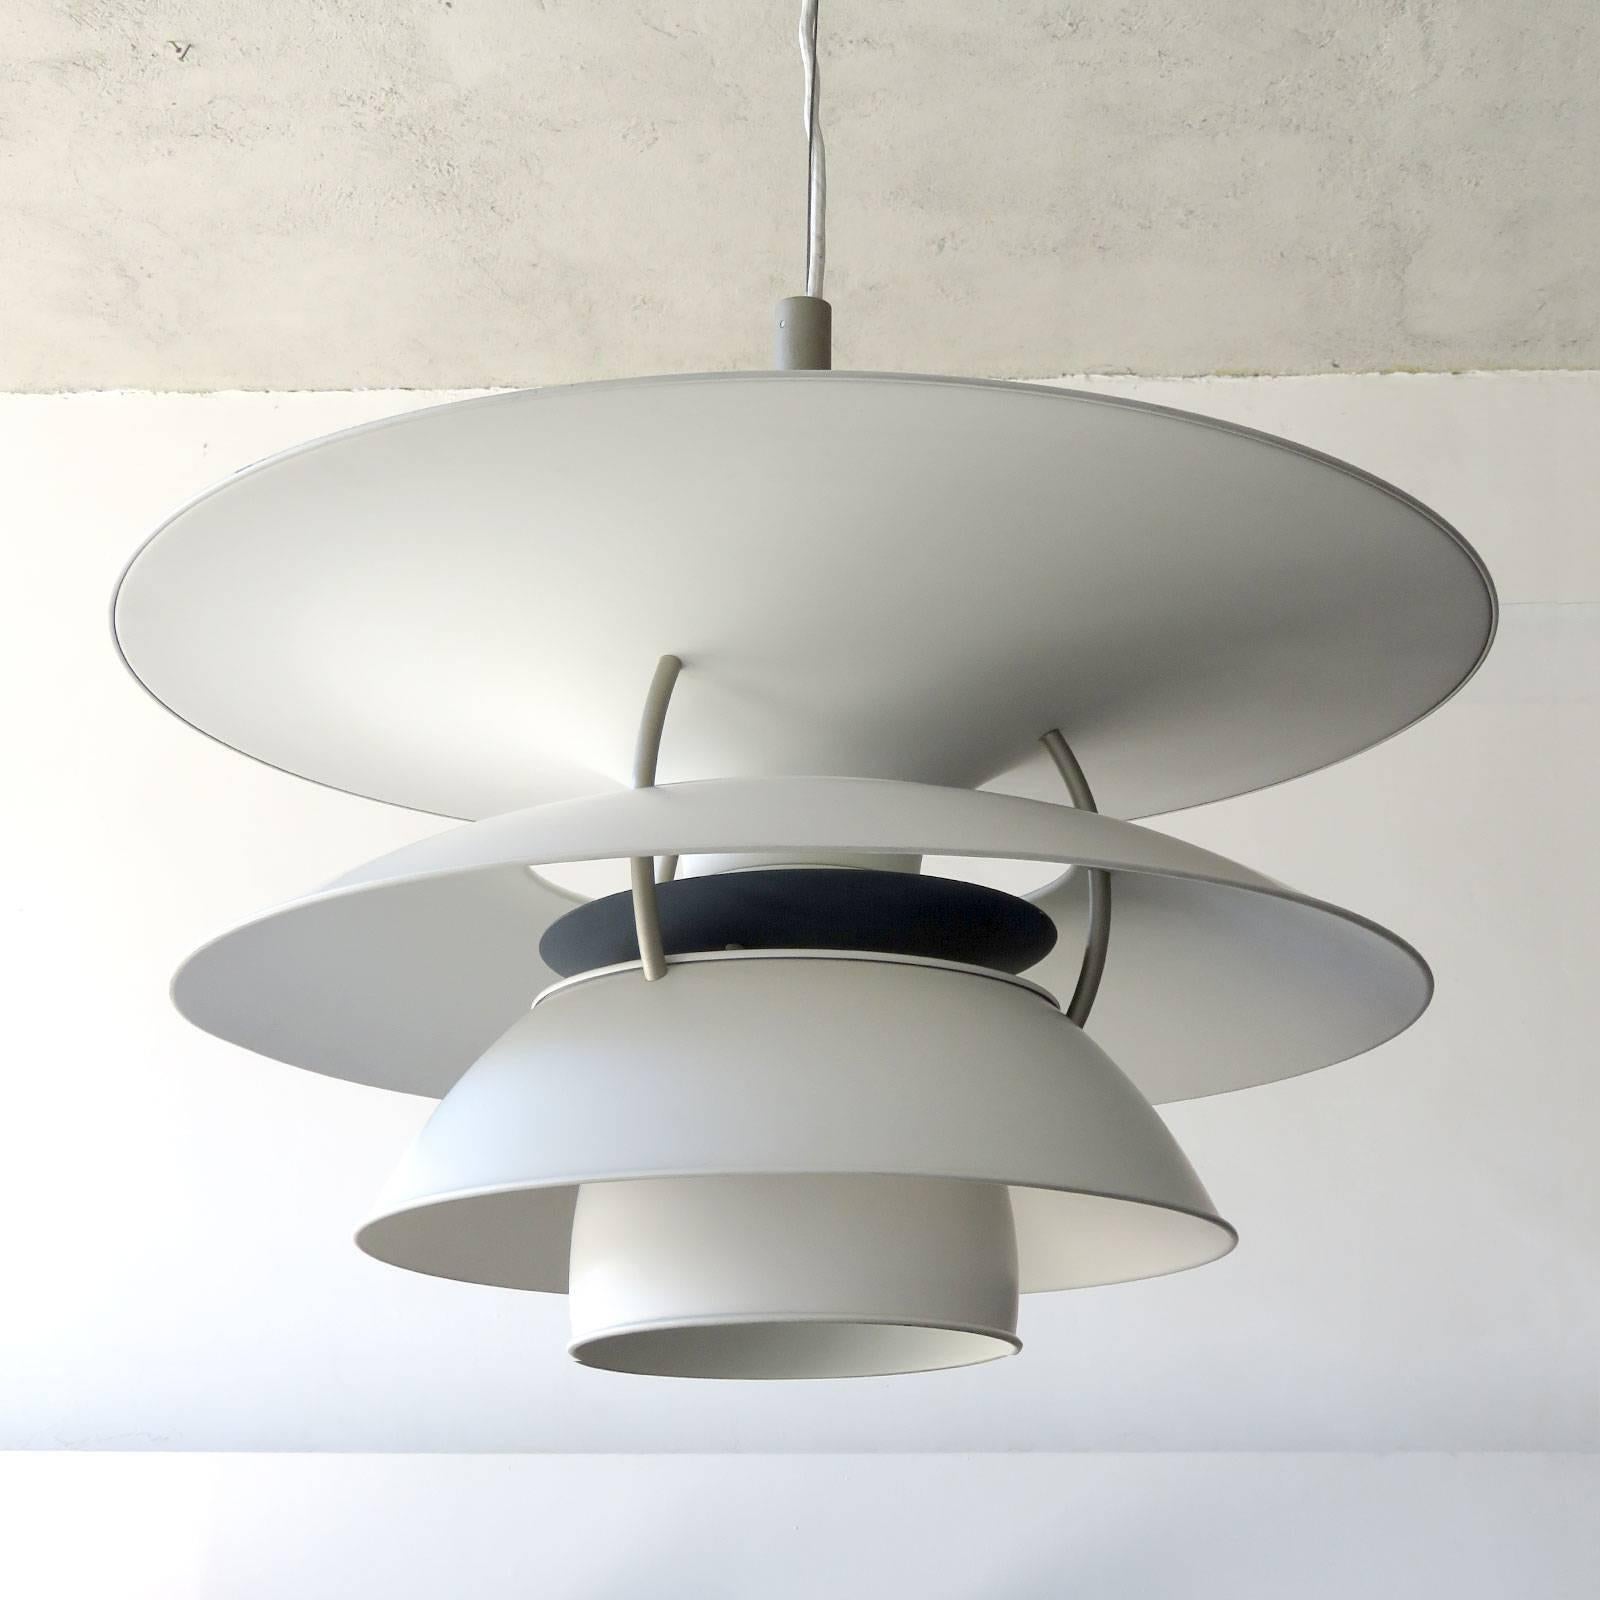 Wonderful large-scale pendant by Poul Henningsen for the Charlottenborg Exhibition Hall in Copenhagen, produced by Louis Poulsen, the enameled metal body is predominately white with grey hardware and dark blue reflector disc, current drop of